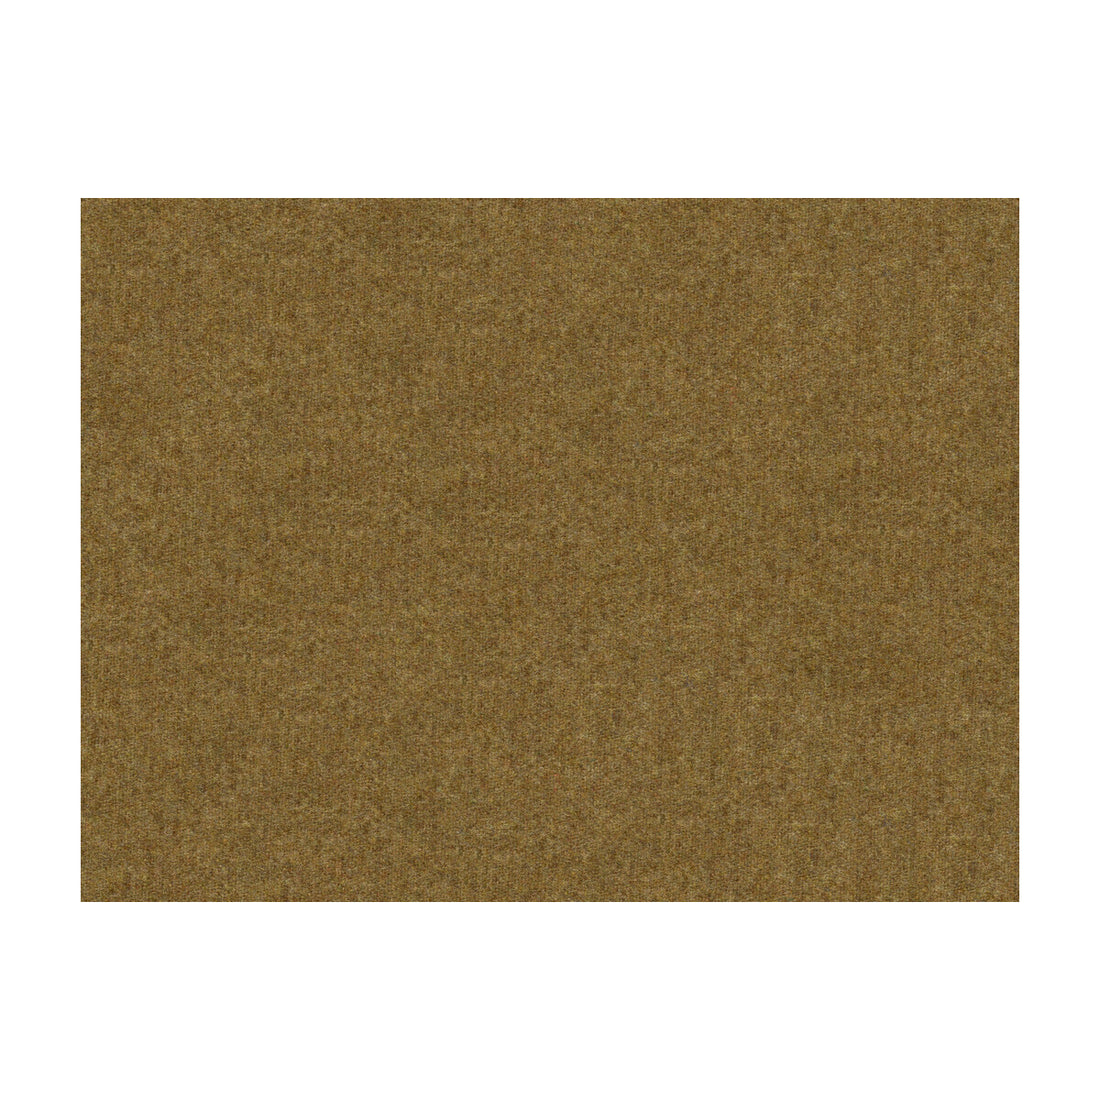 Chevalier Wool fabric in allspice color - pattern 8013149.630.0 - by Brunschwig &amp; Fils